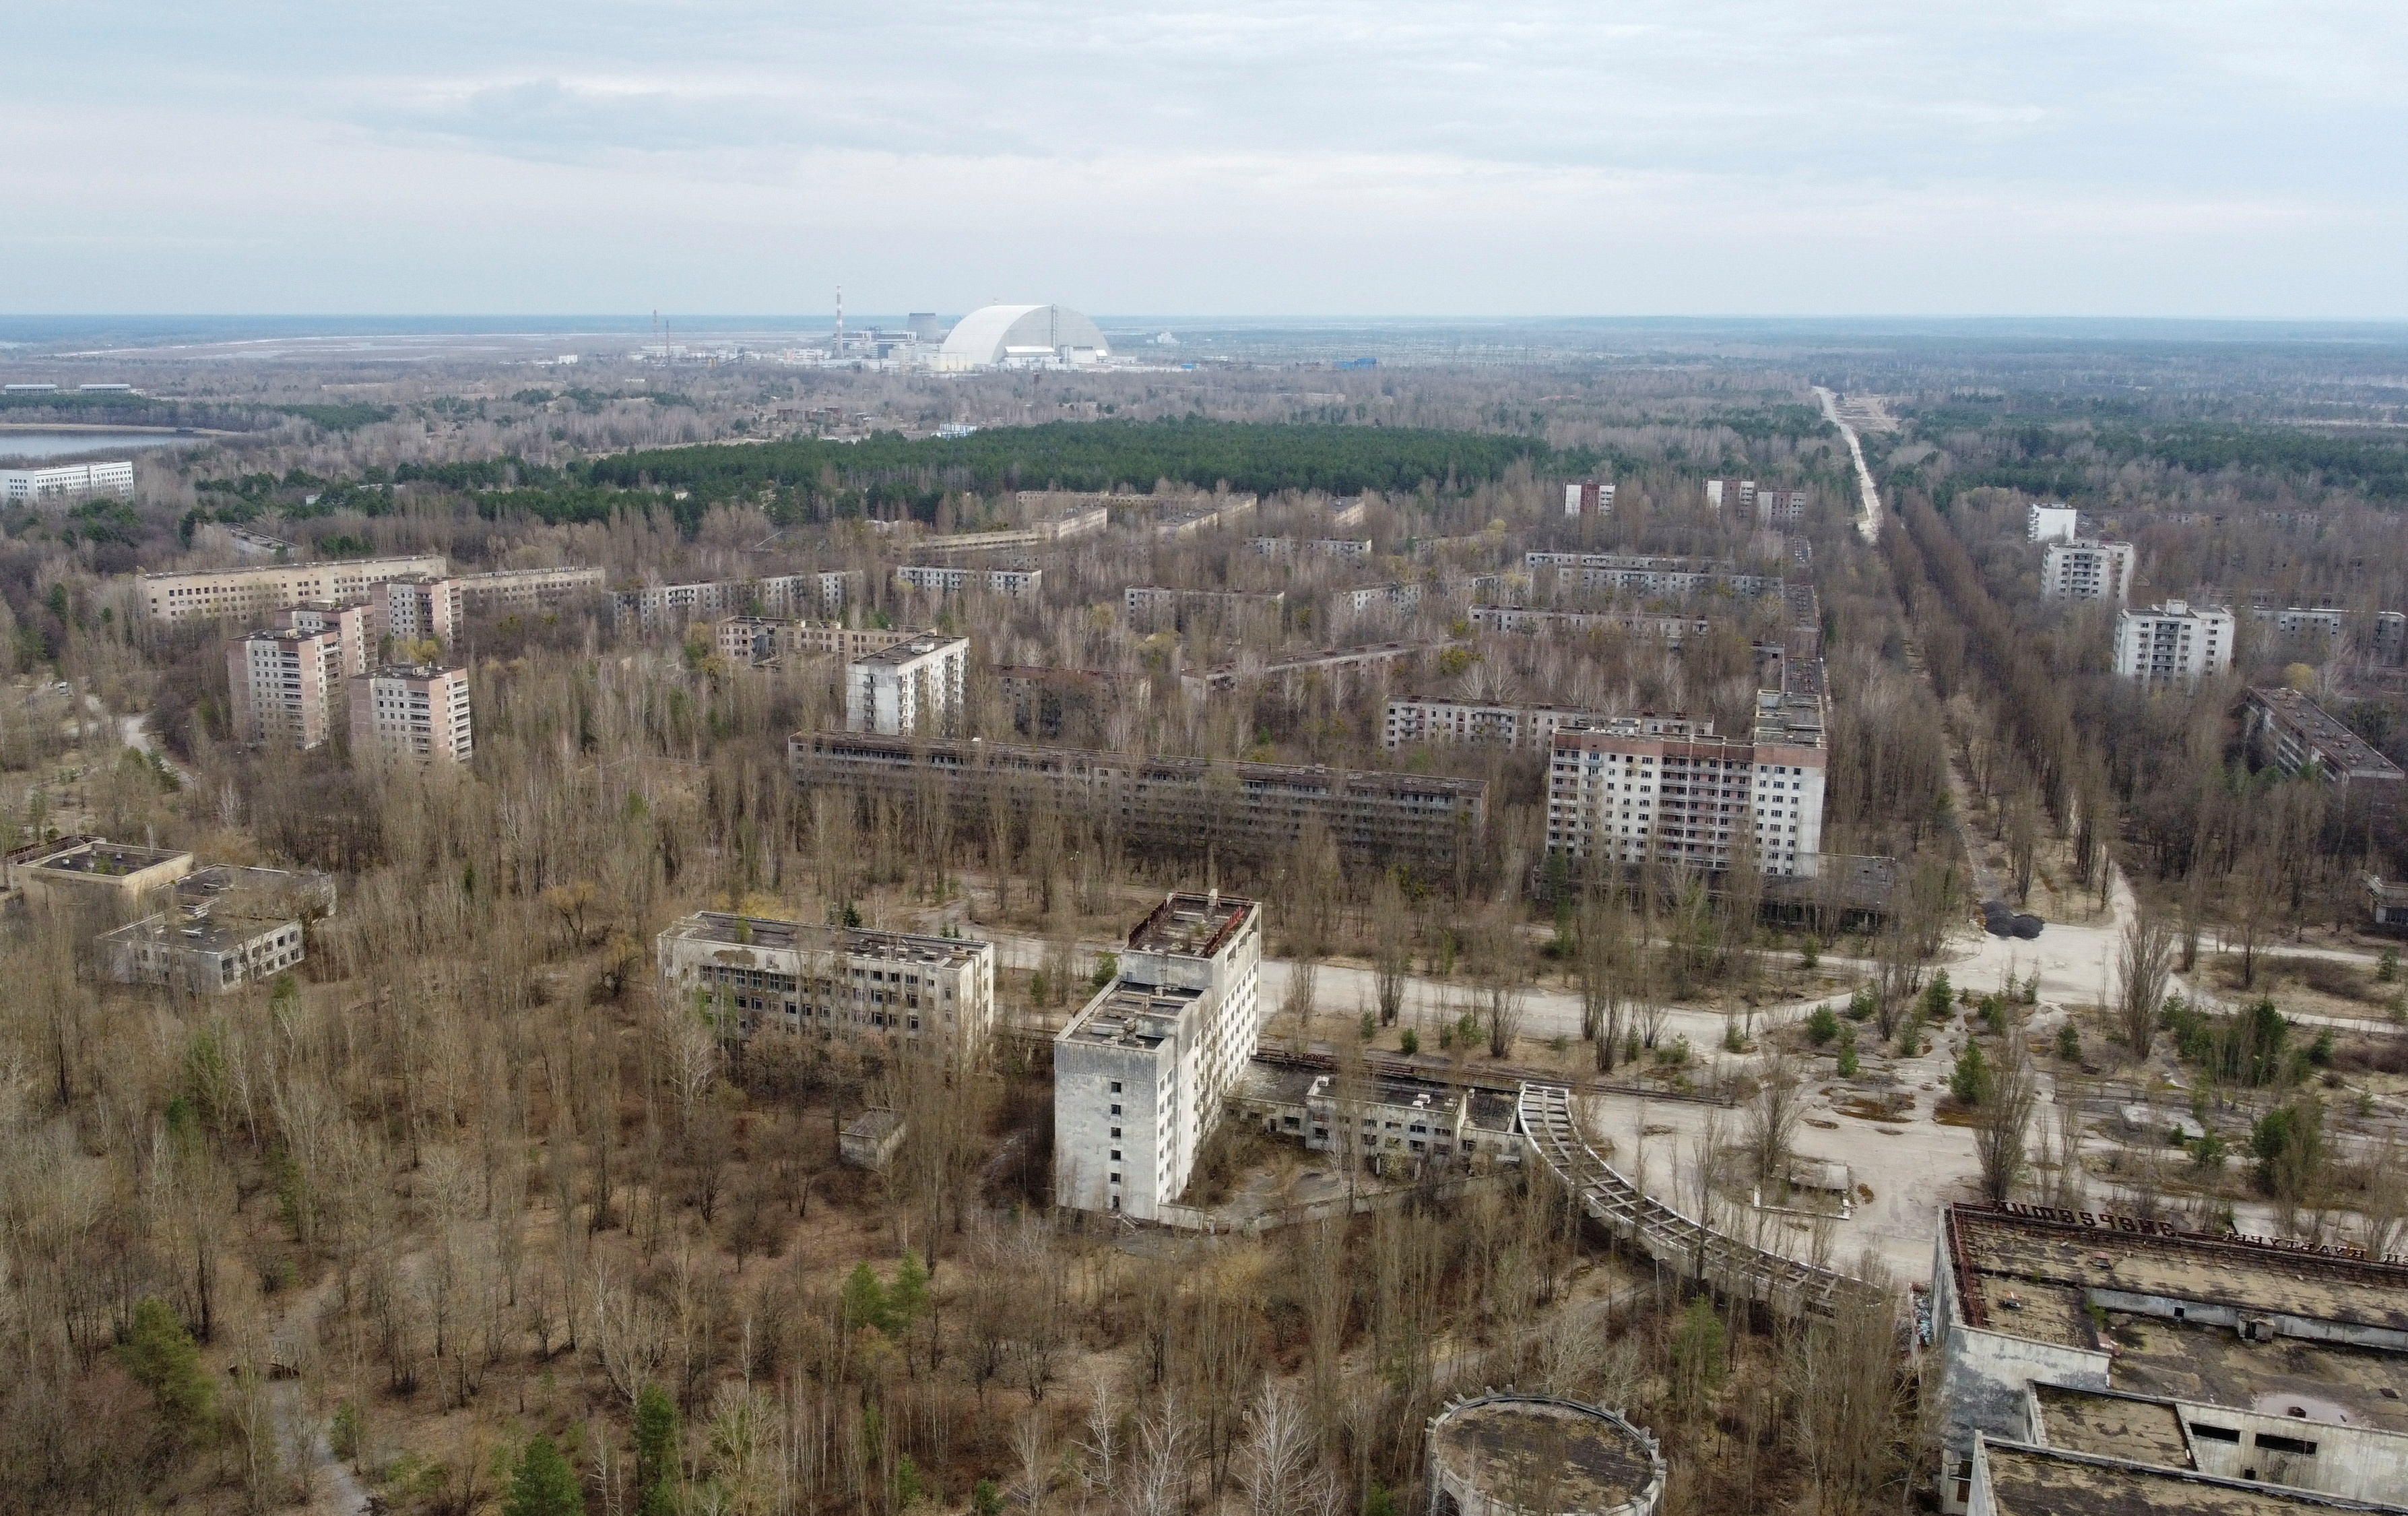 A New Safe Confinement structure at the Chernobyl Nuclear Power Plant is seen behind the abandoned town of Pripyat